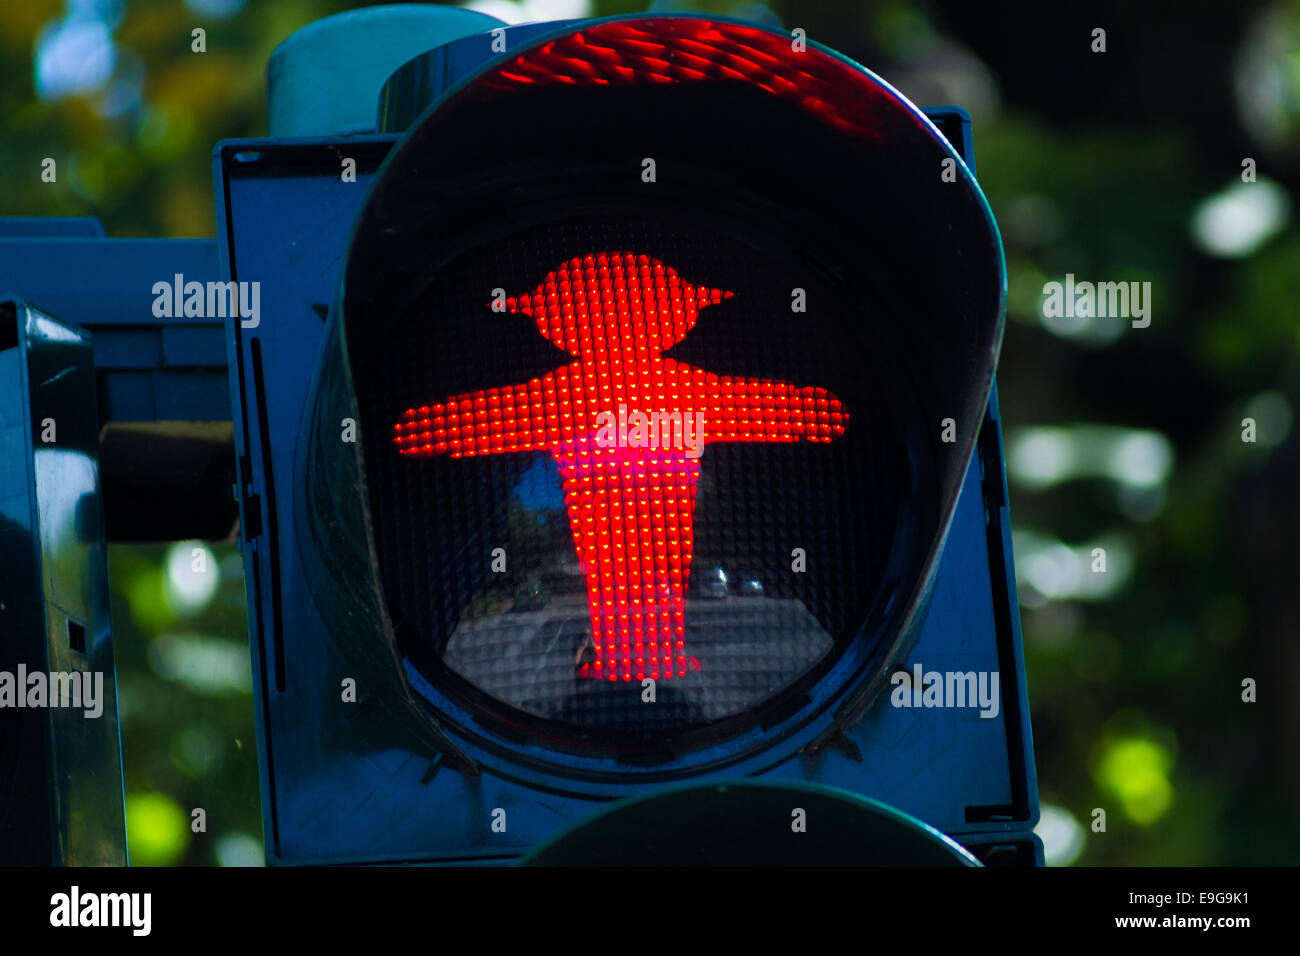 Red Ampel traffic sign in eastern Germany Stock Photo